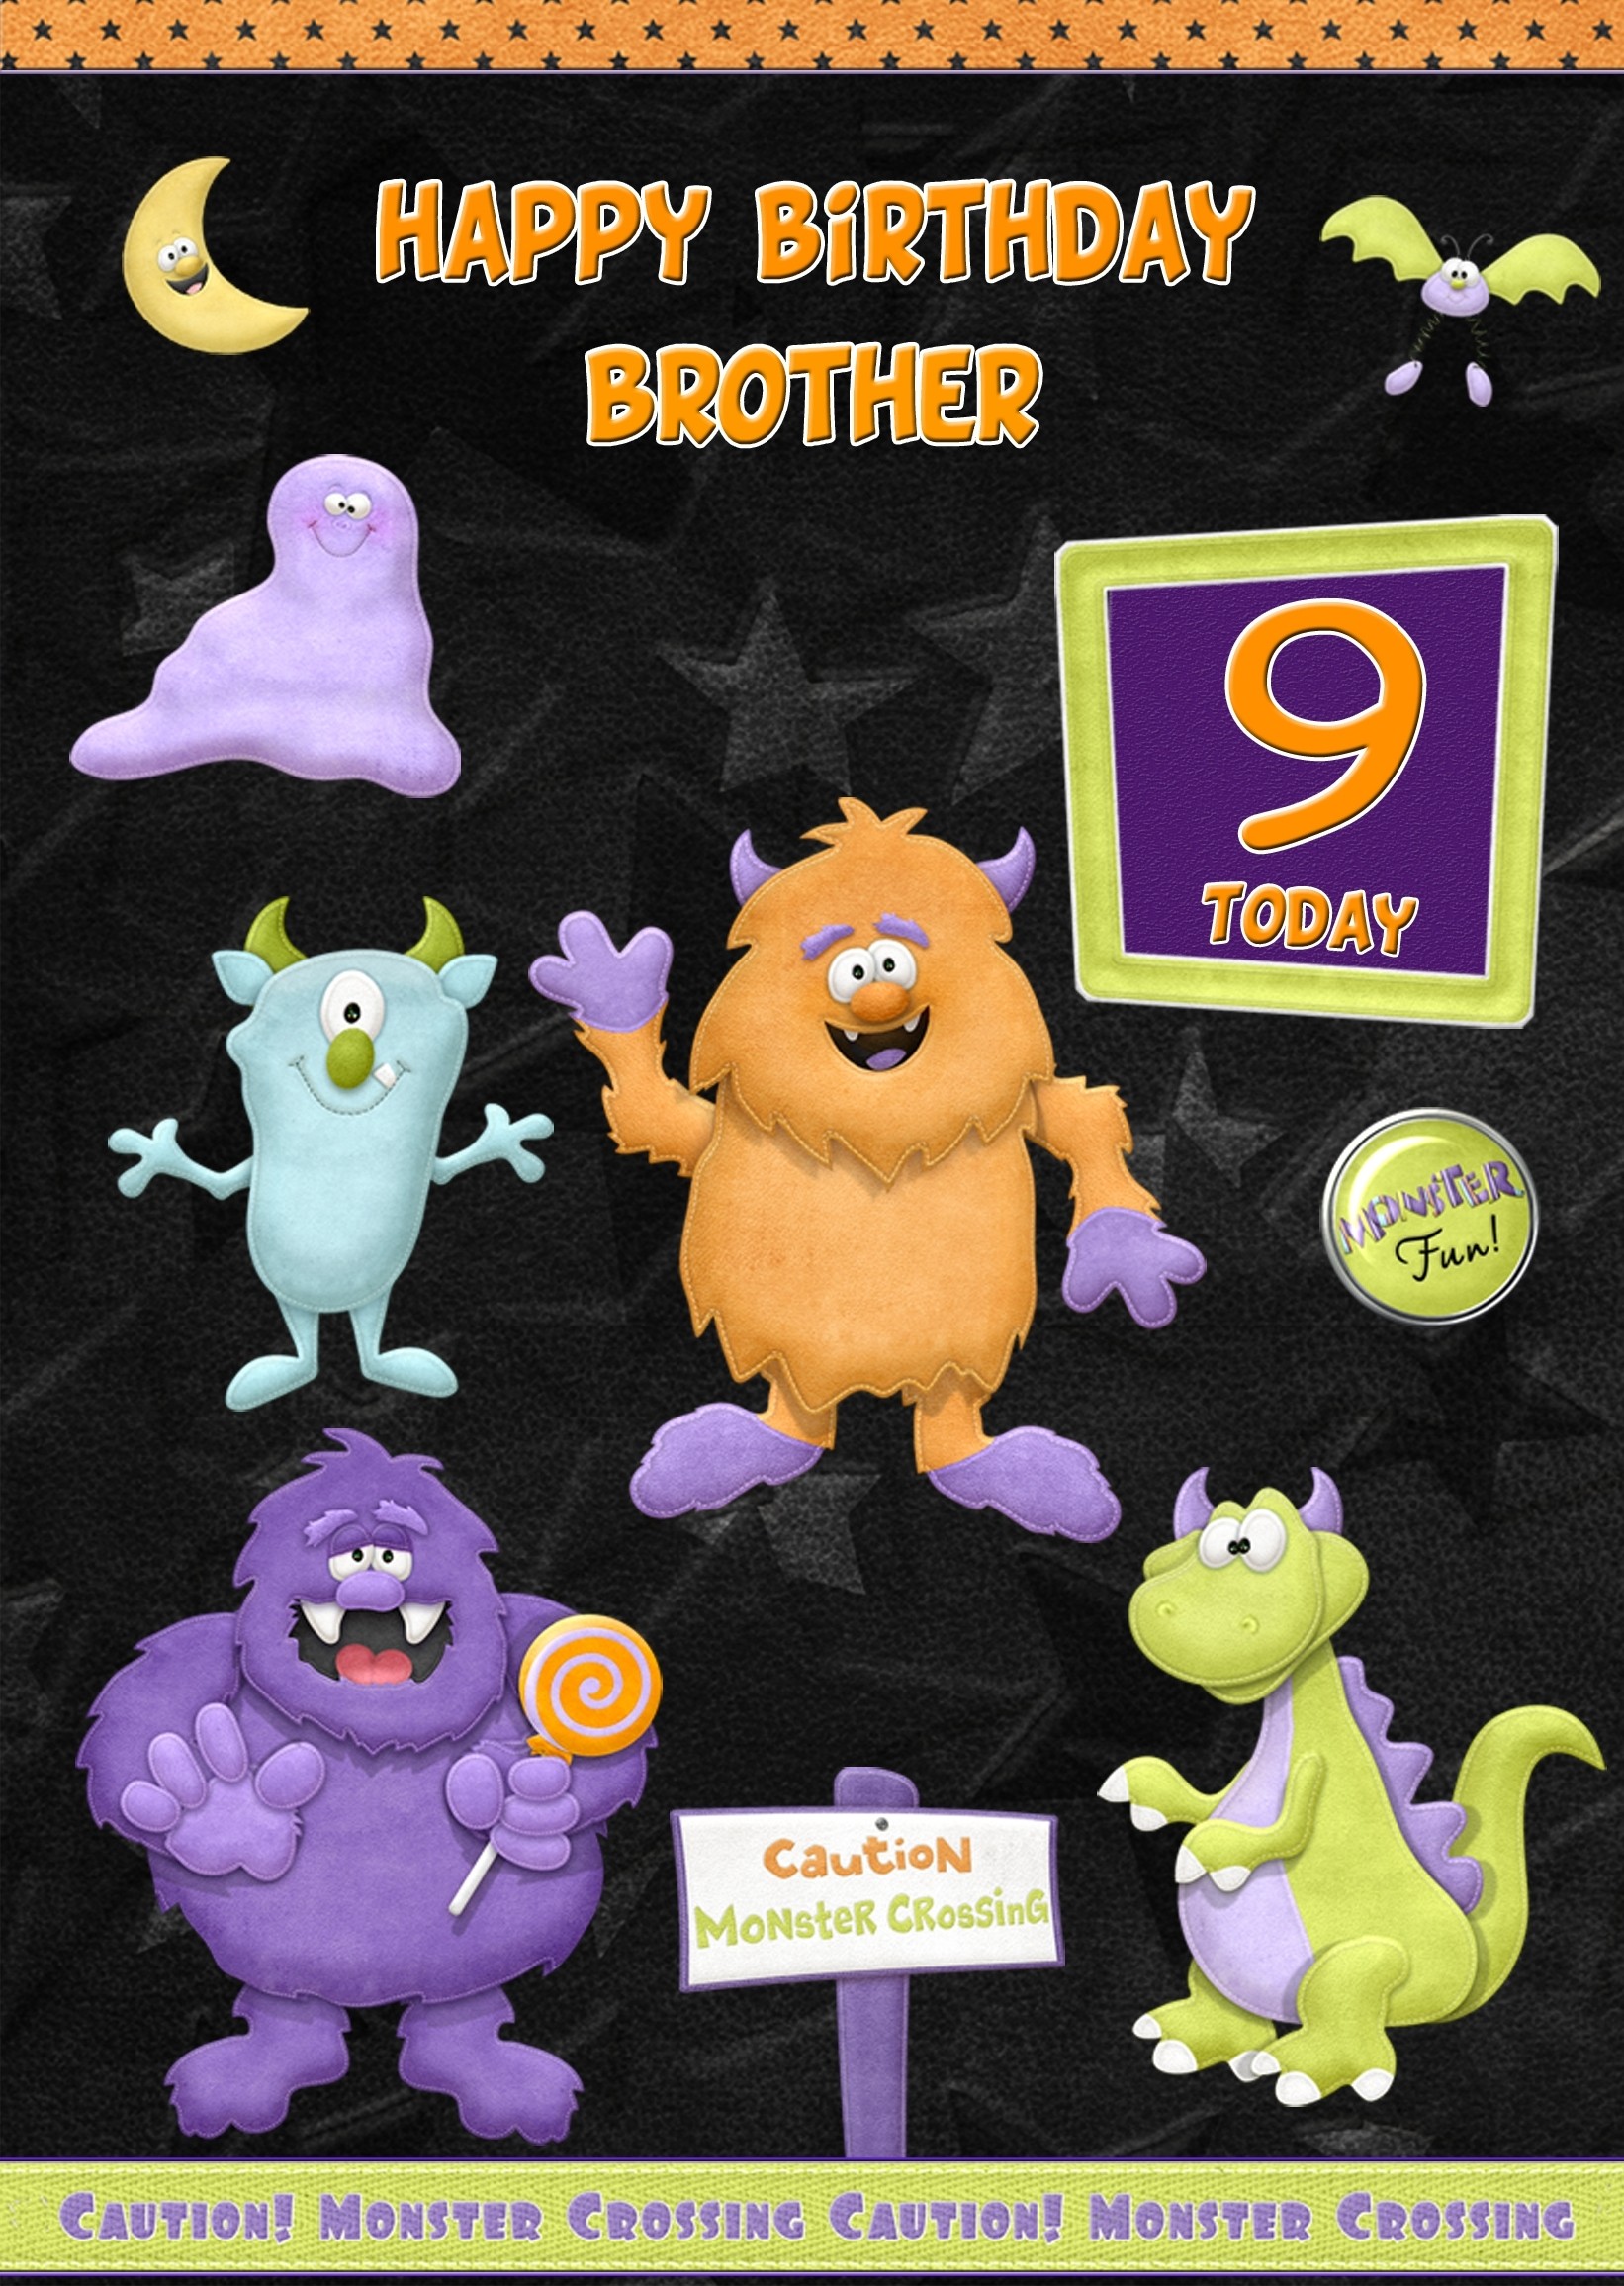 Kids 9th Birthday Funny Monster Cartoon Card for Brother